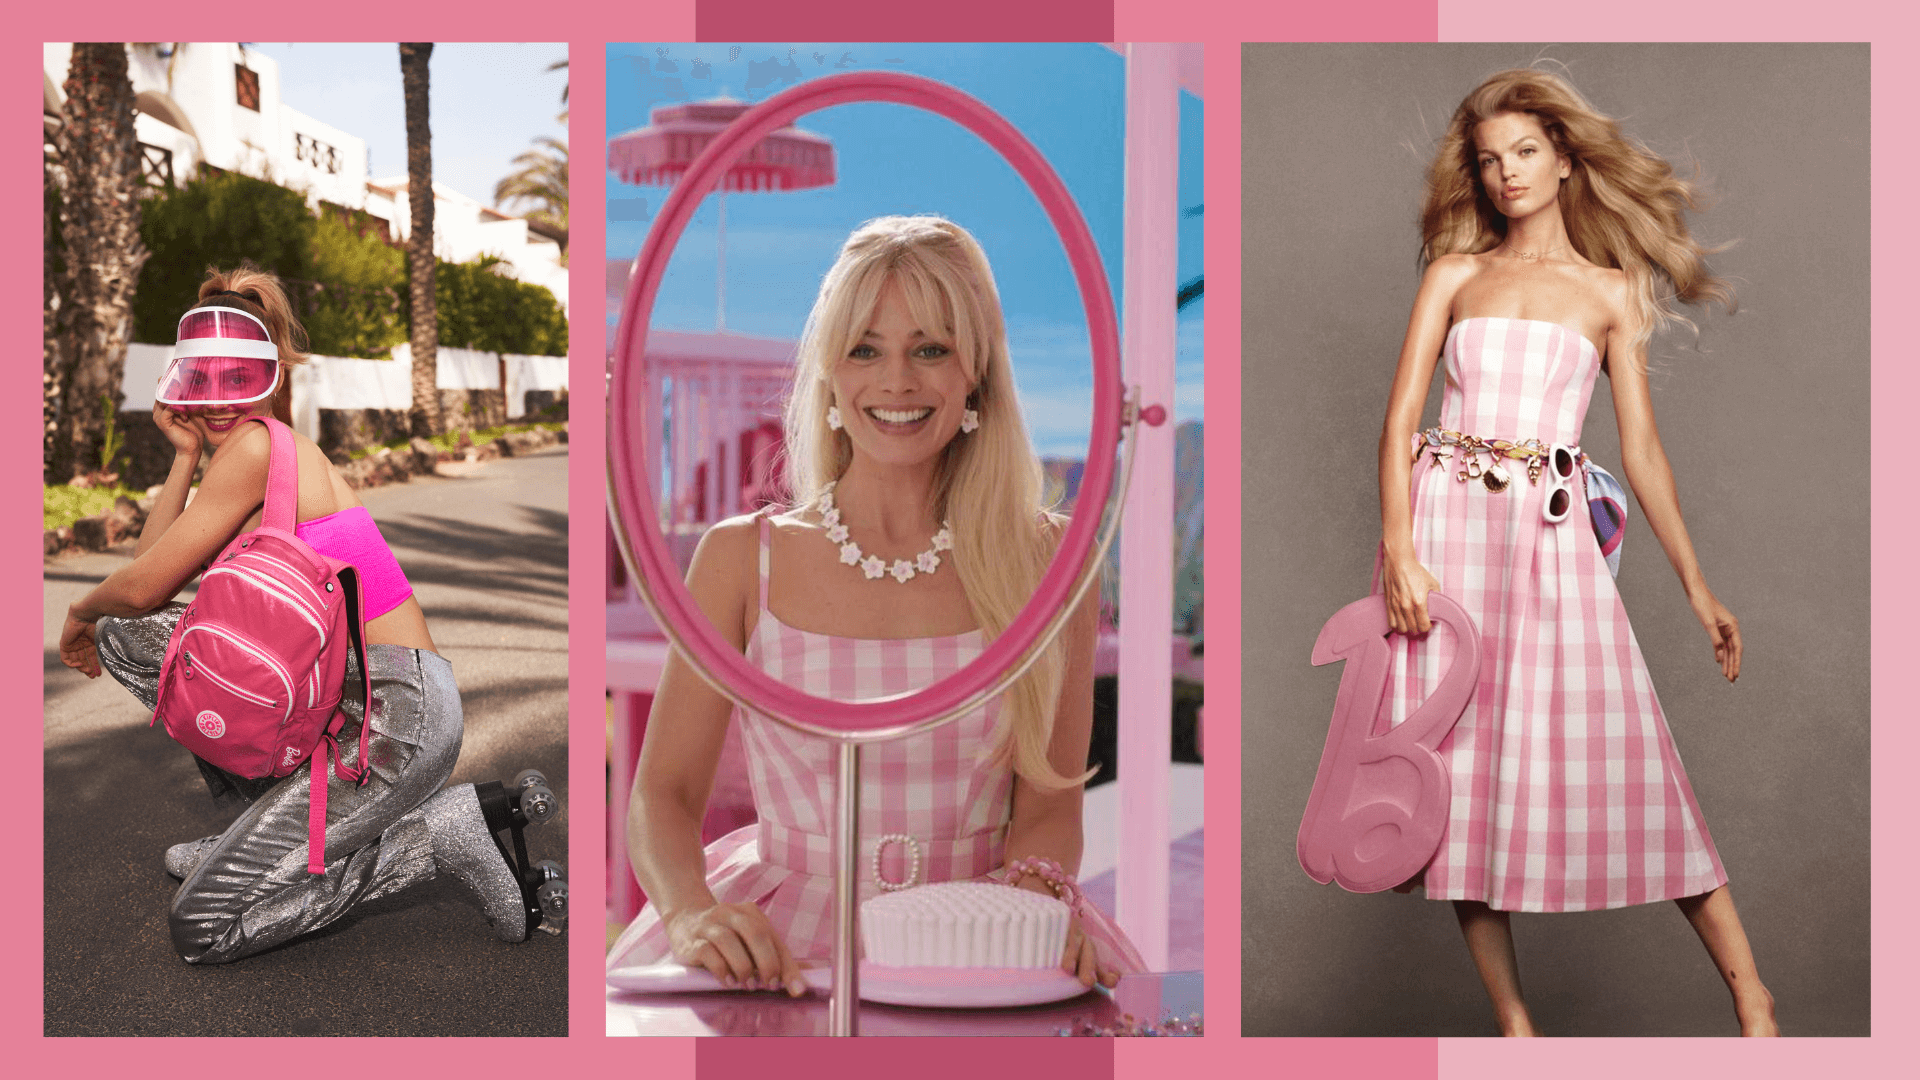 Zara x Barbie Collection Features Pink Gingham Dress